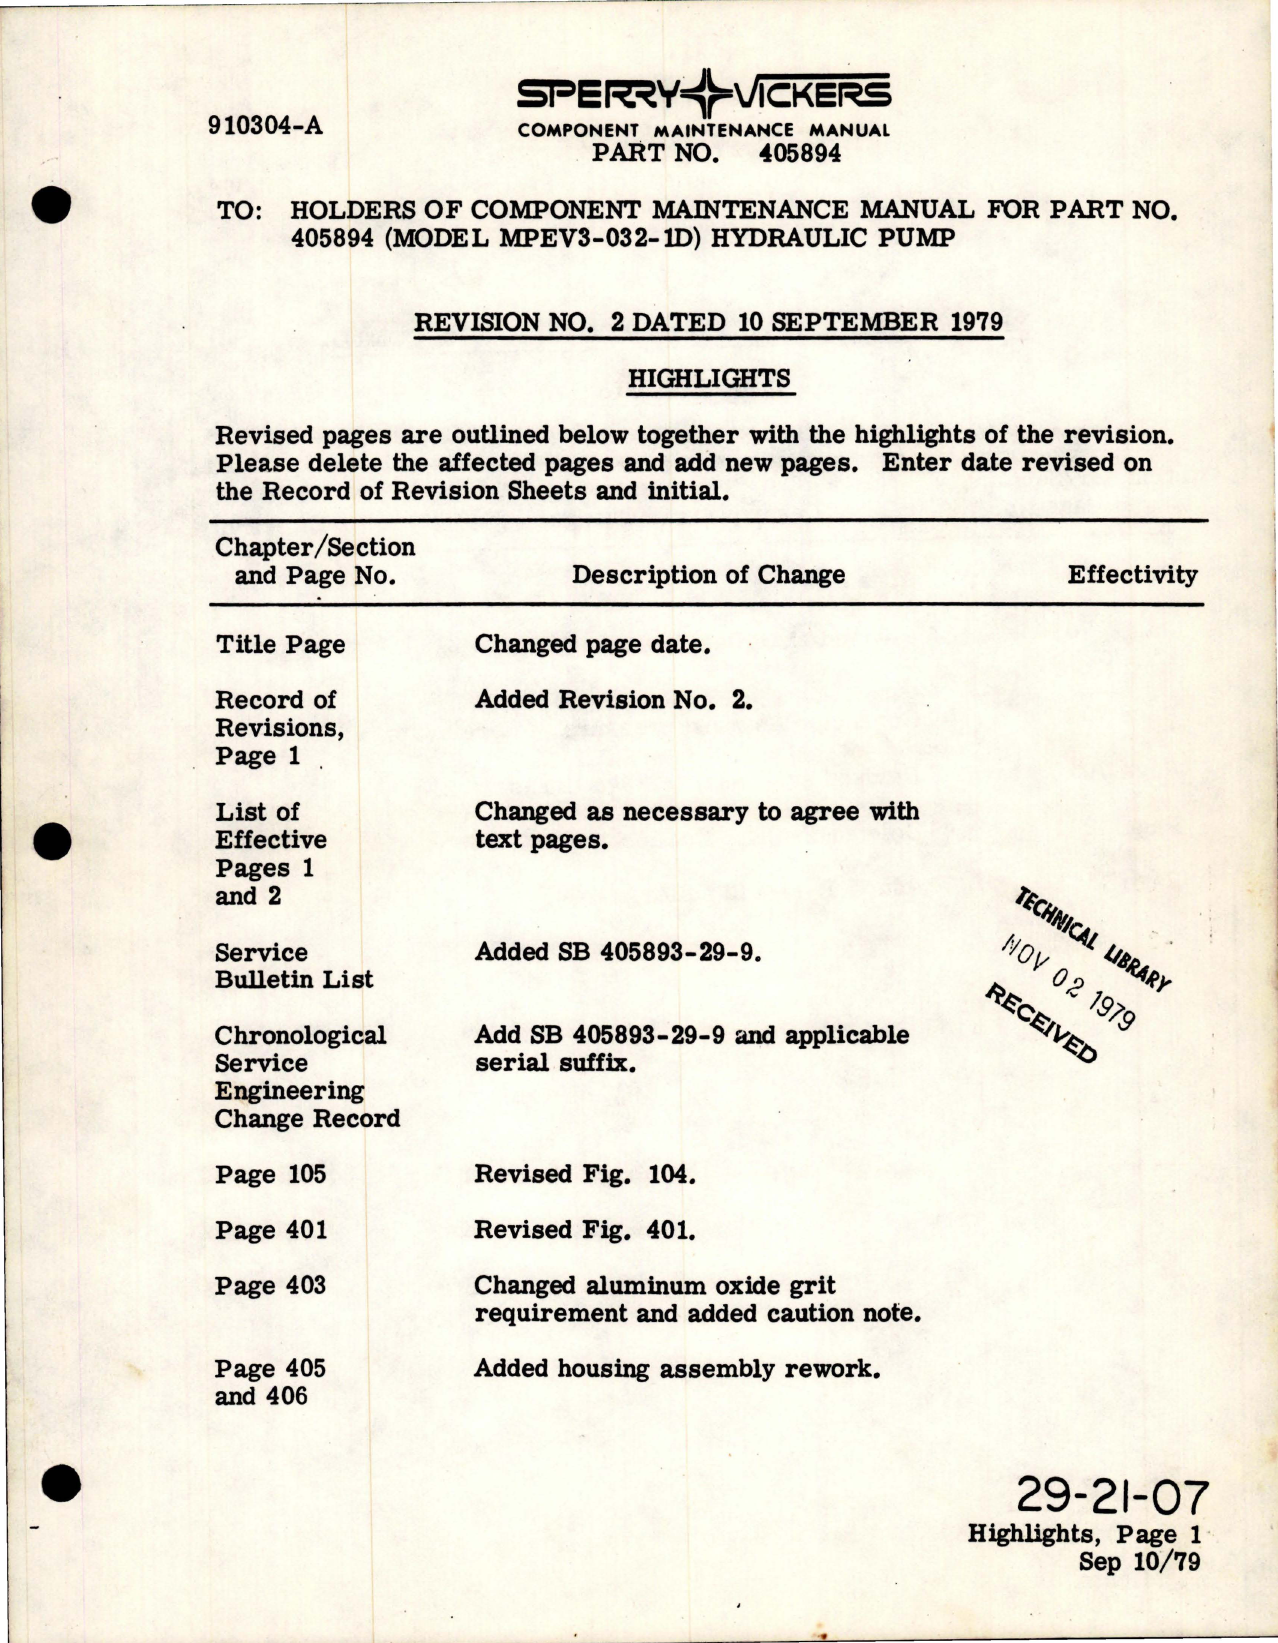 Sample page 1 from AirCorps Library document: Component Maintenance Manual for Hydraulic Pump - Part 405894 - Revision No. 2 